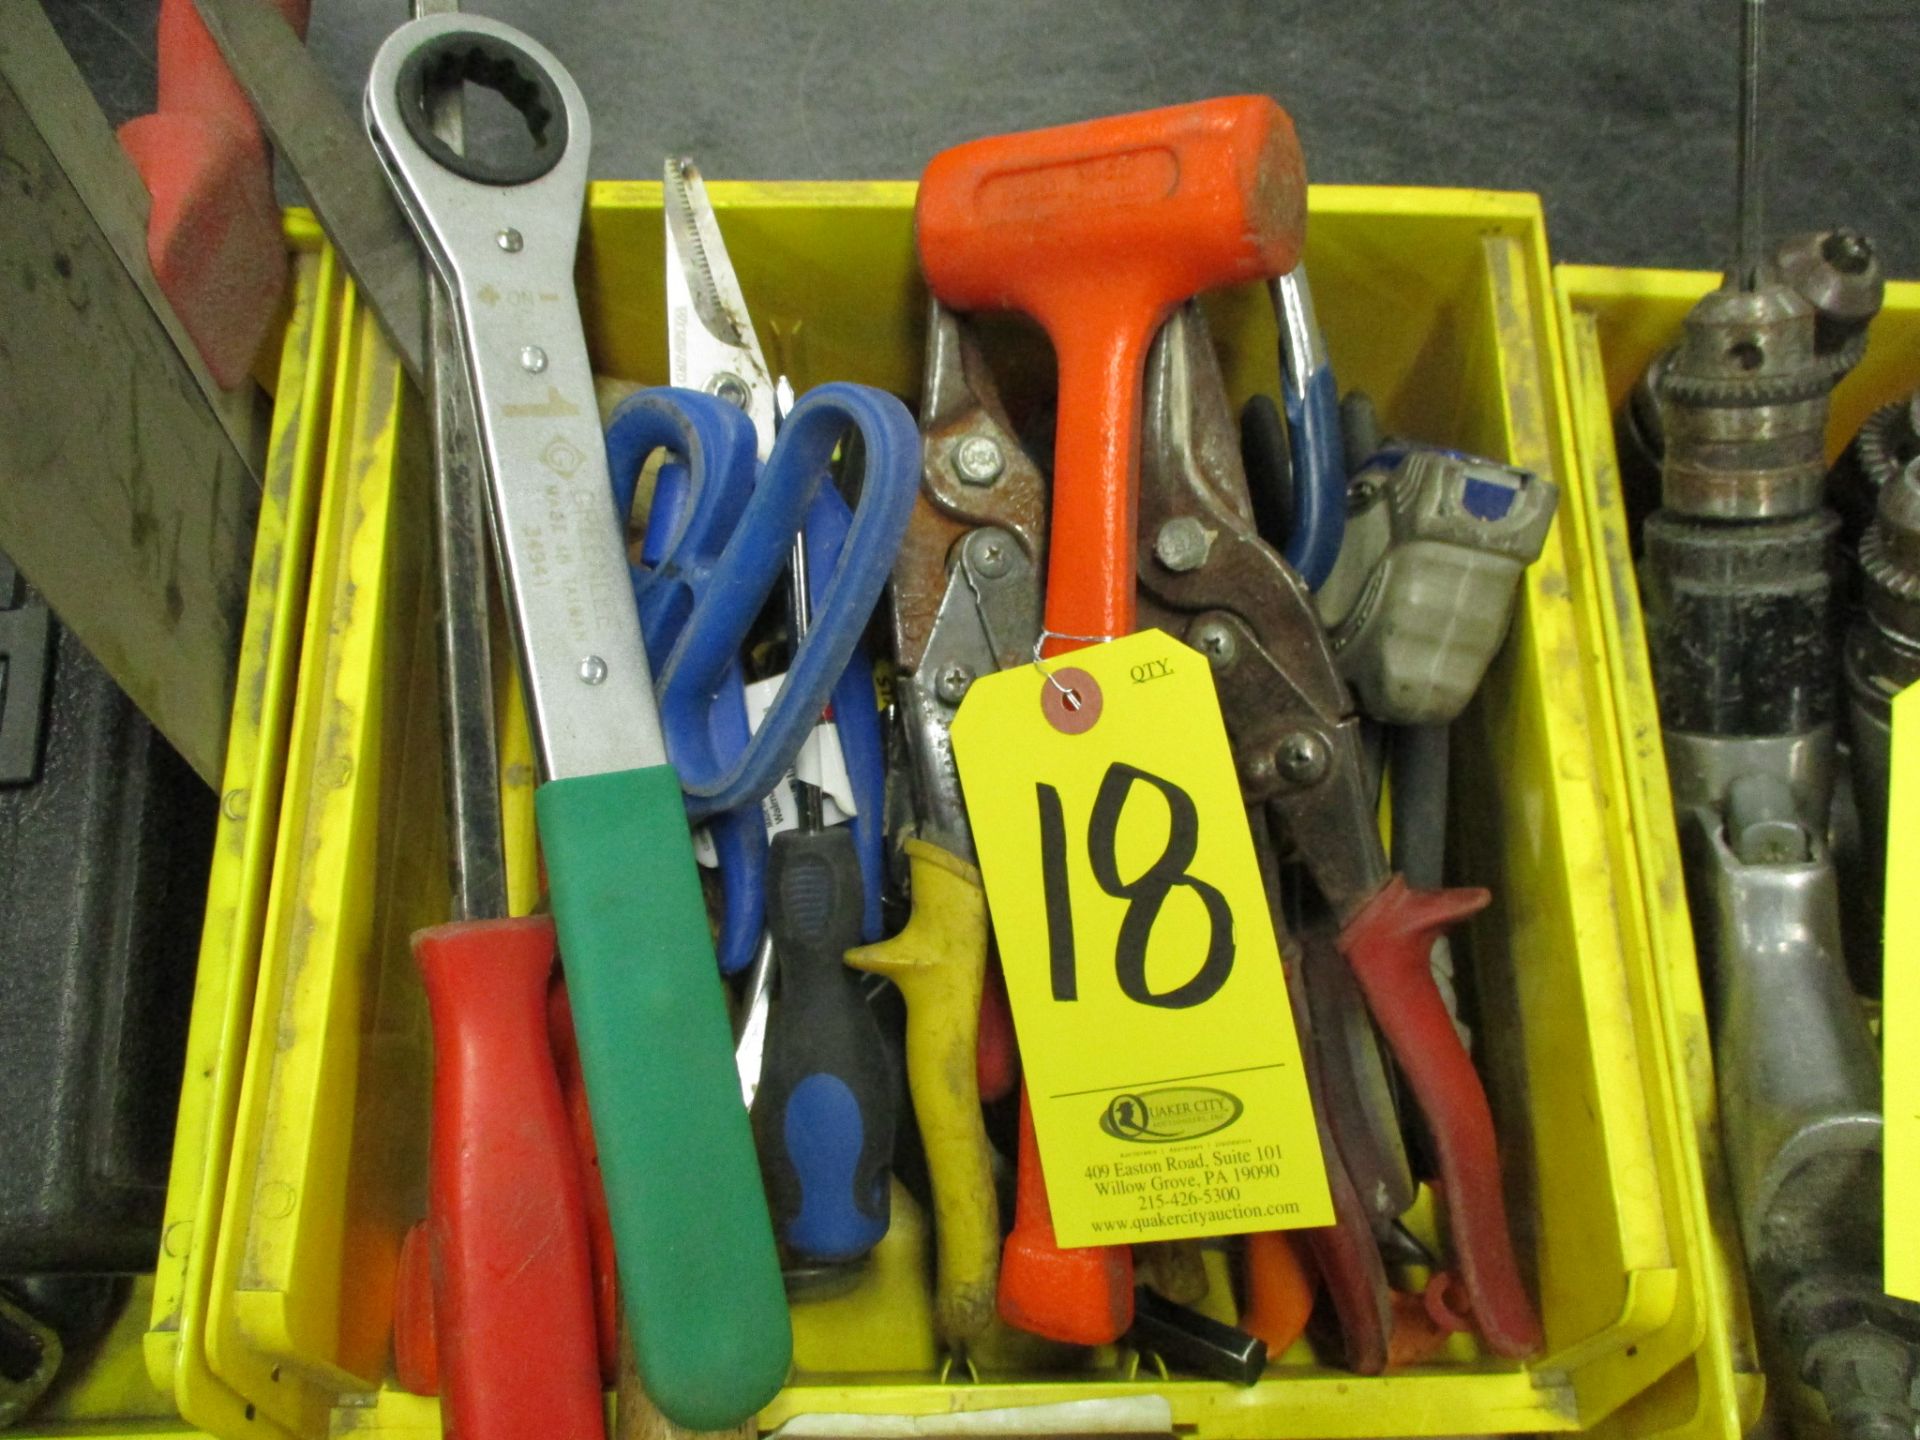 Assorted Hand Tools including Hammers, Screw Drivers, Putty Knives, Utility Knives, Pliers, Snips, T - Image 2 of 2